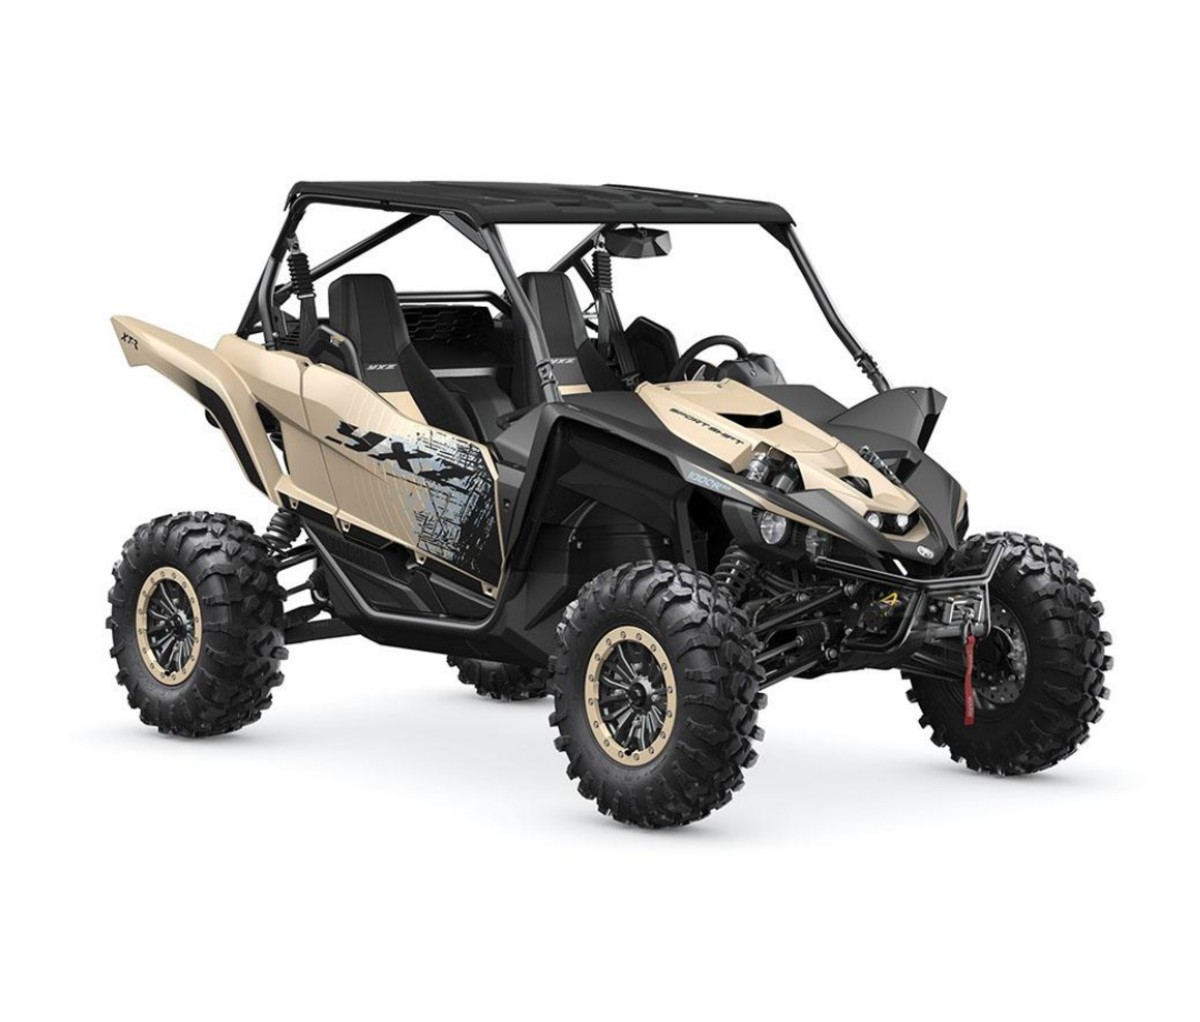 Tan and black Yamaha YXZ1000R SS XT-R side-by-side on a white background.